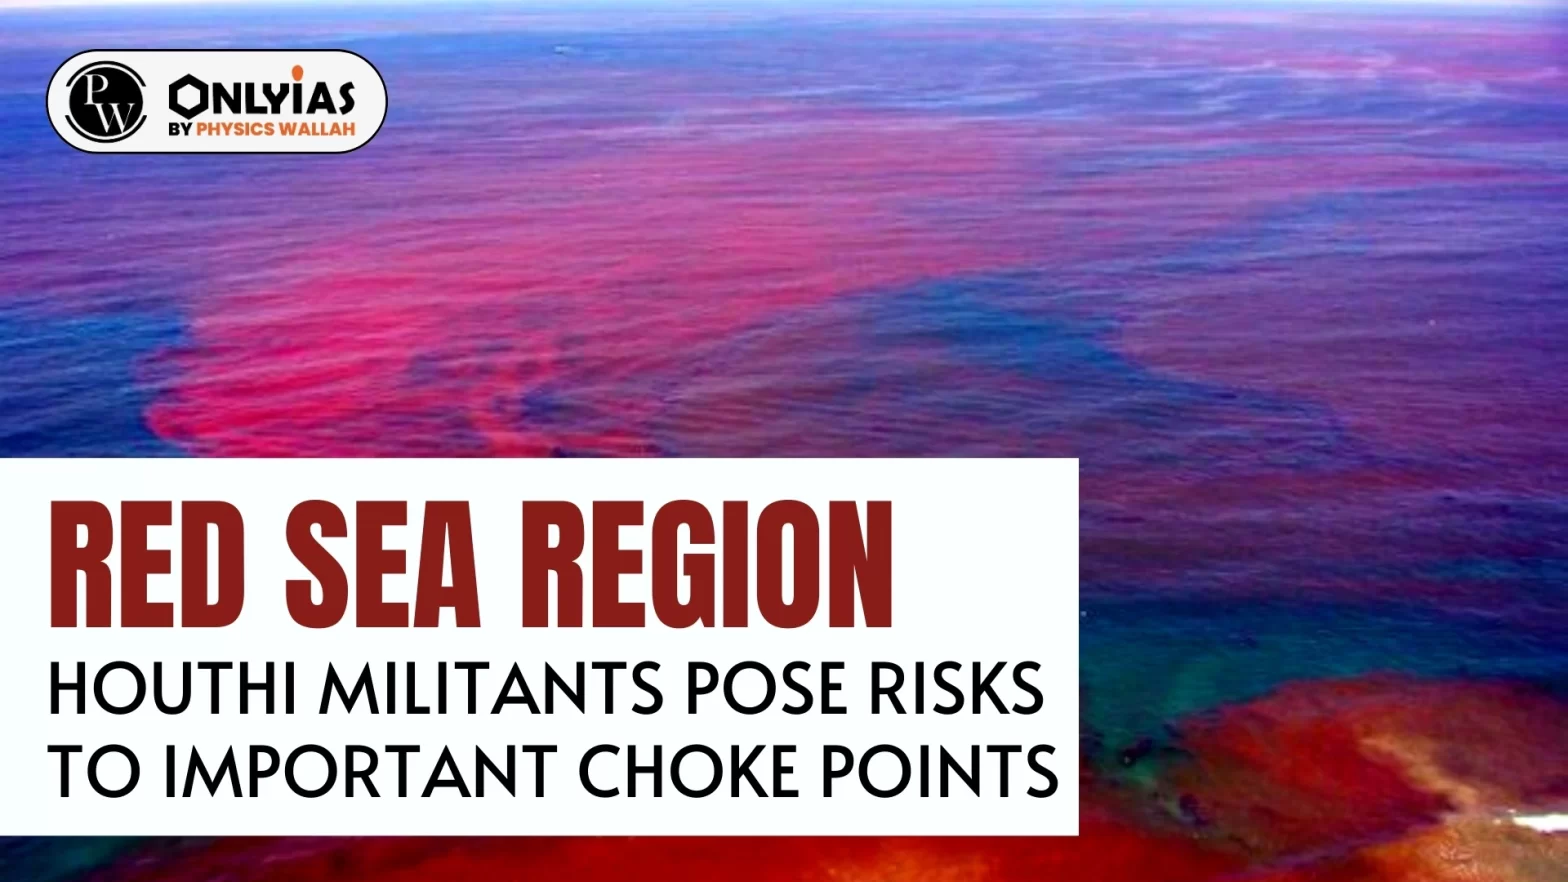 Red Sea Region: Houthi Militants Pose Risks to Important Choke Points